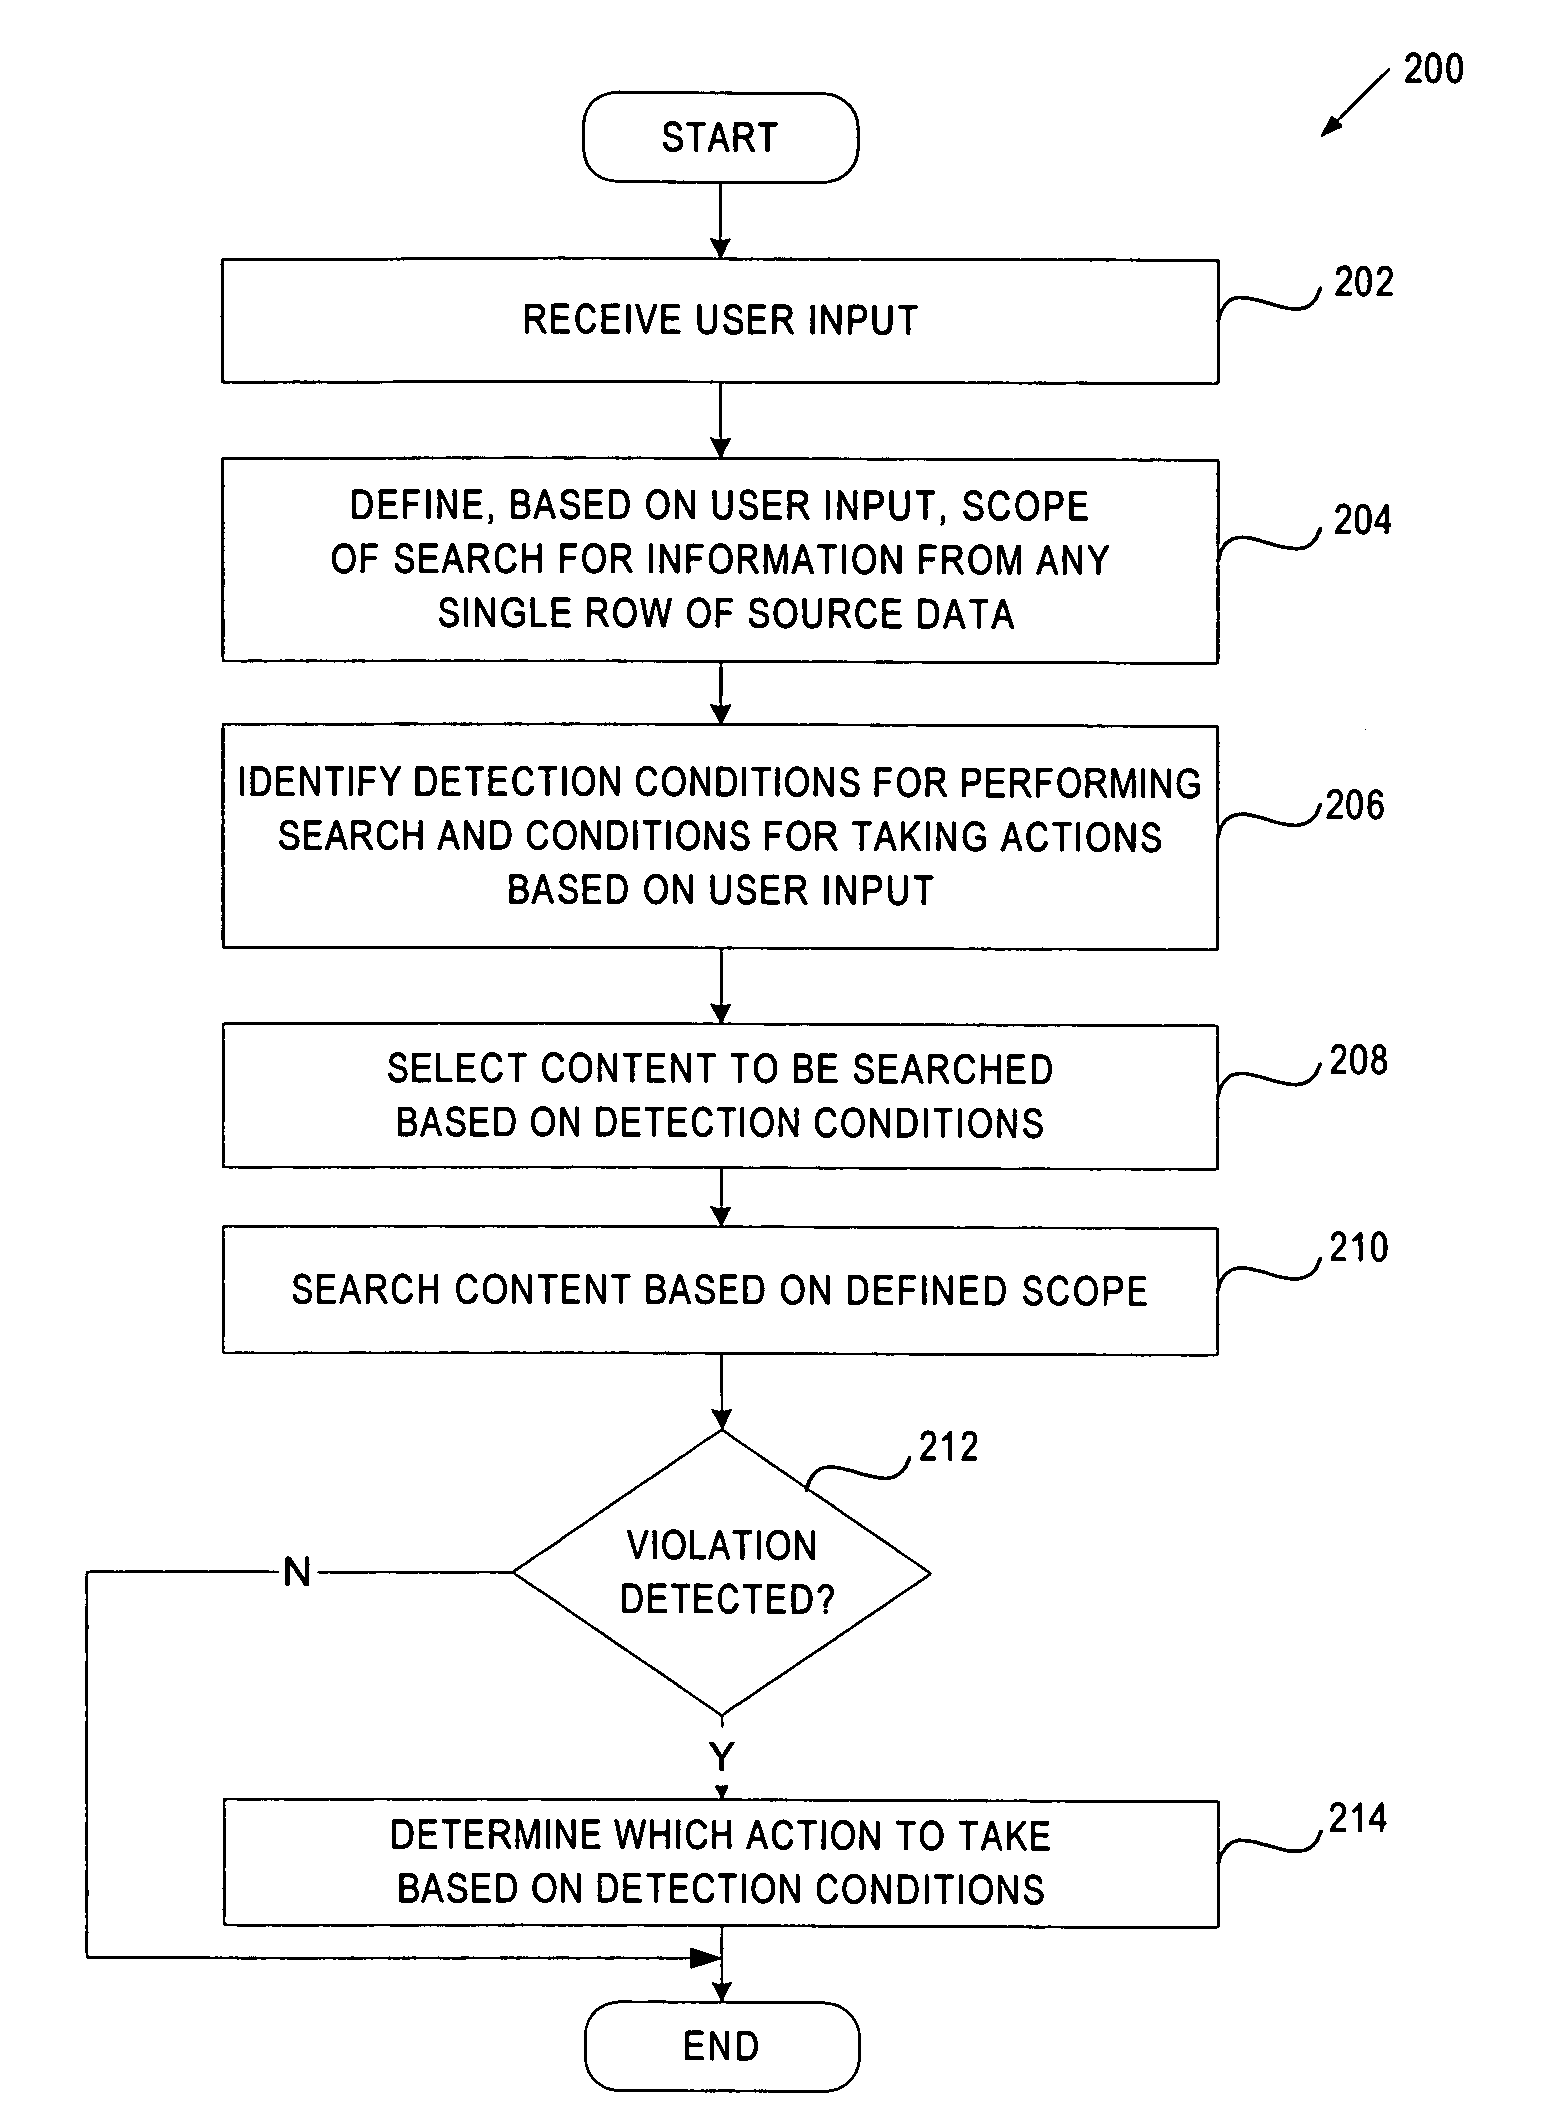 Method and apparatus to define the scope of a search for information from a tabular data source